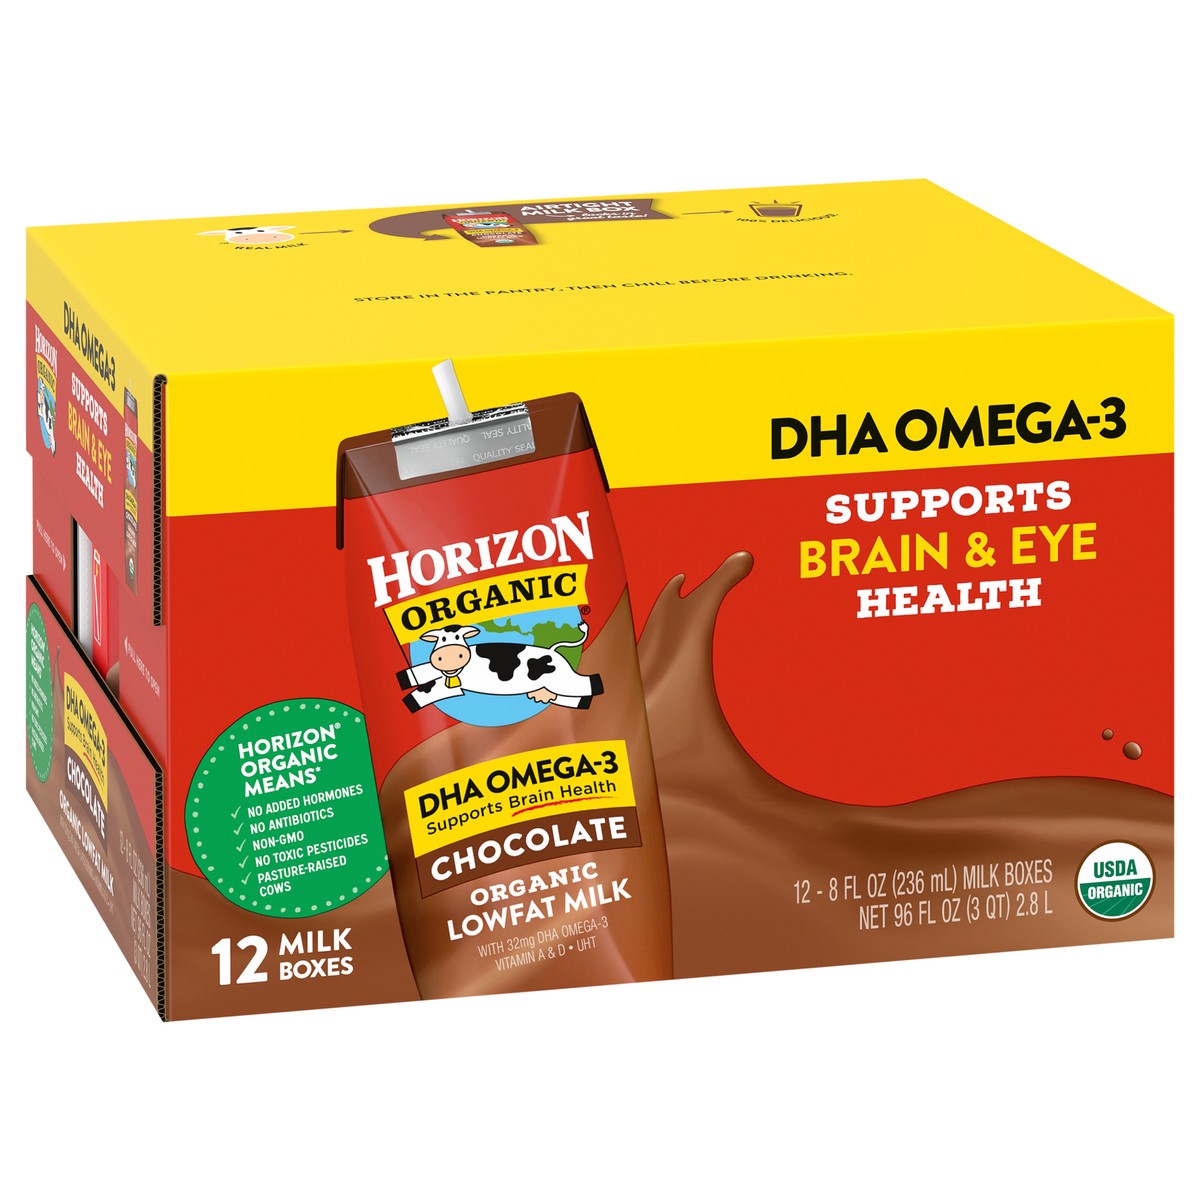 slide 3 of 12, Horizon Organic Shelf-Stable 1% Low Fat milk Boxes with DHA Omega-3, Chocolate, 8 oz., 12 Pack, 8 fl oz